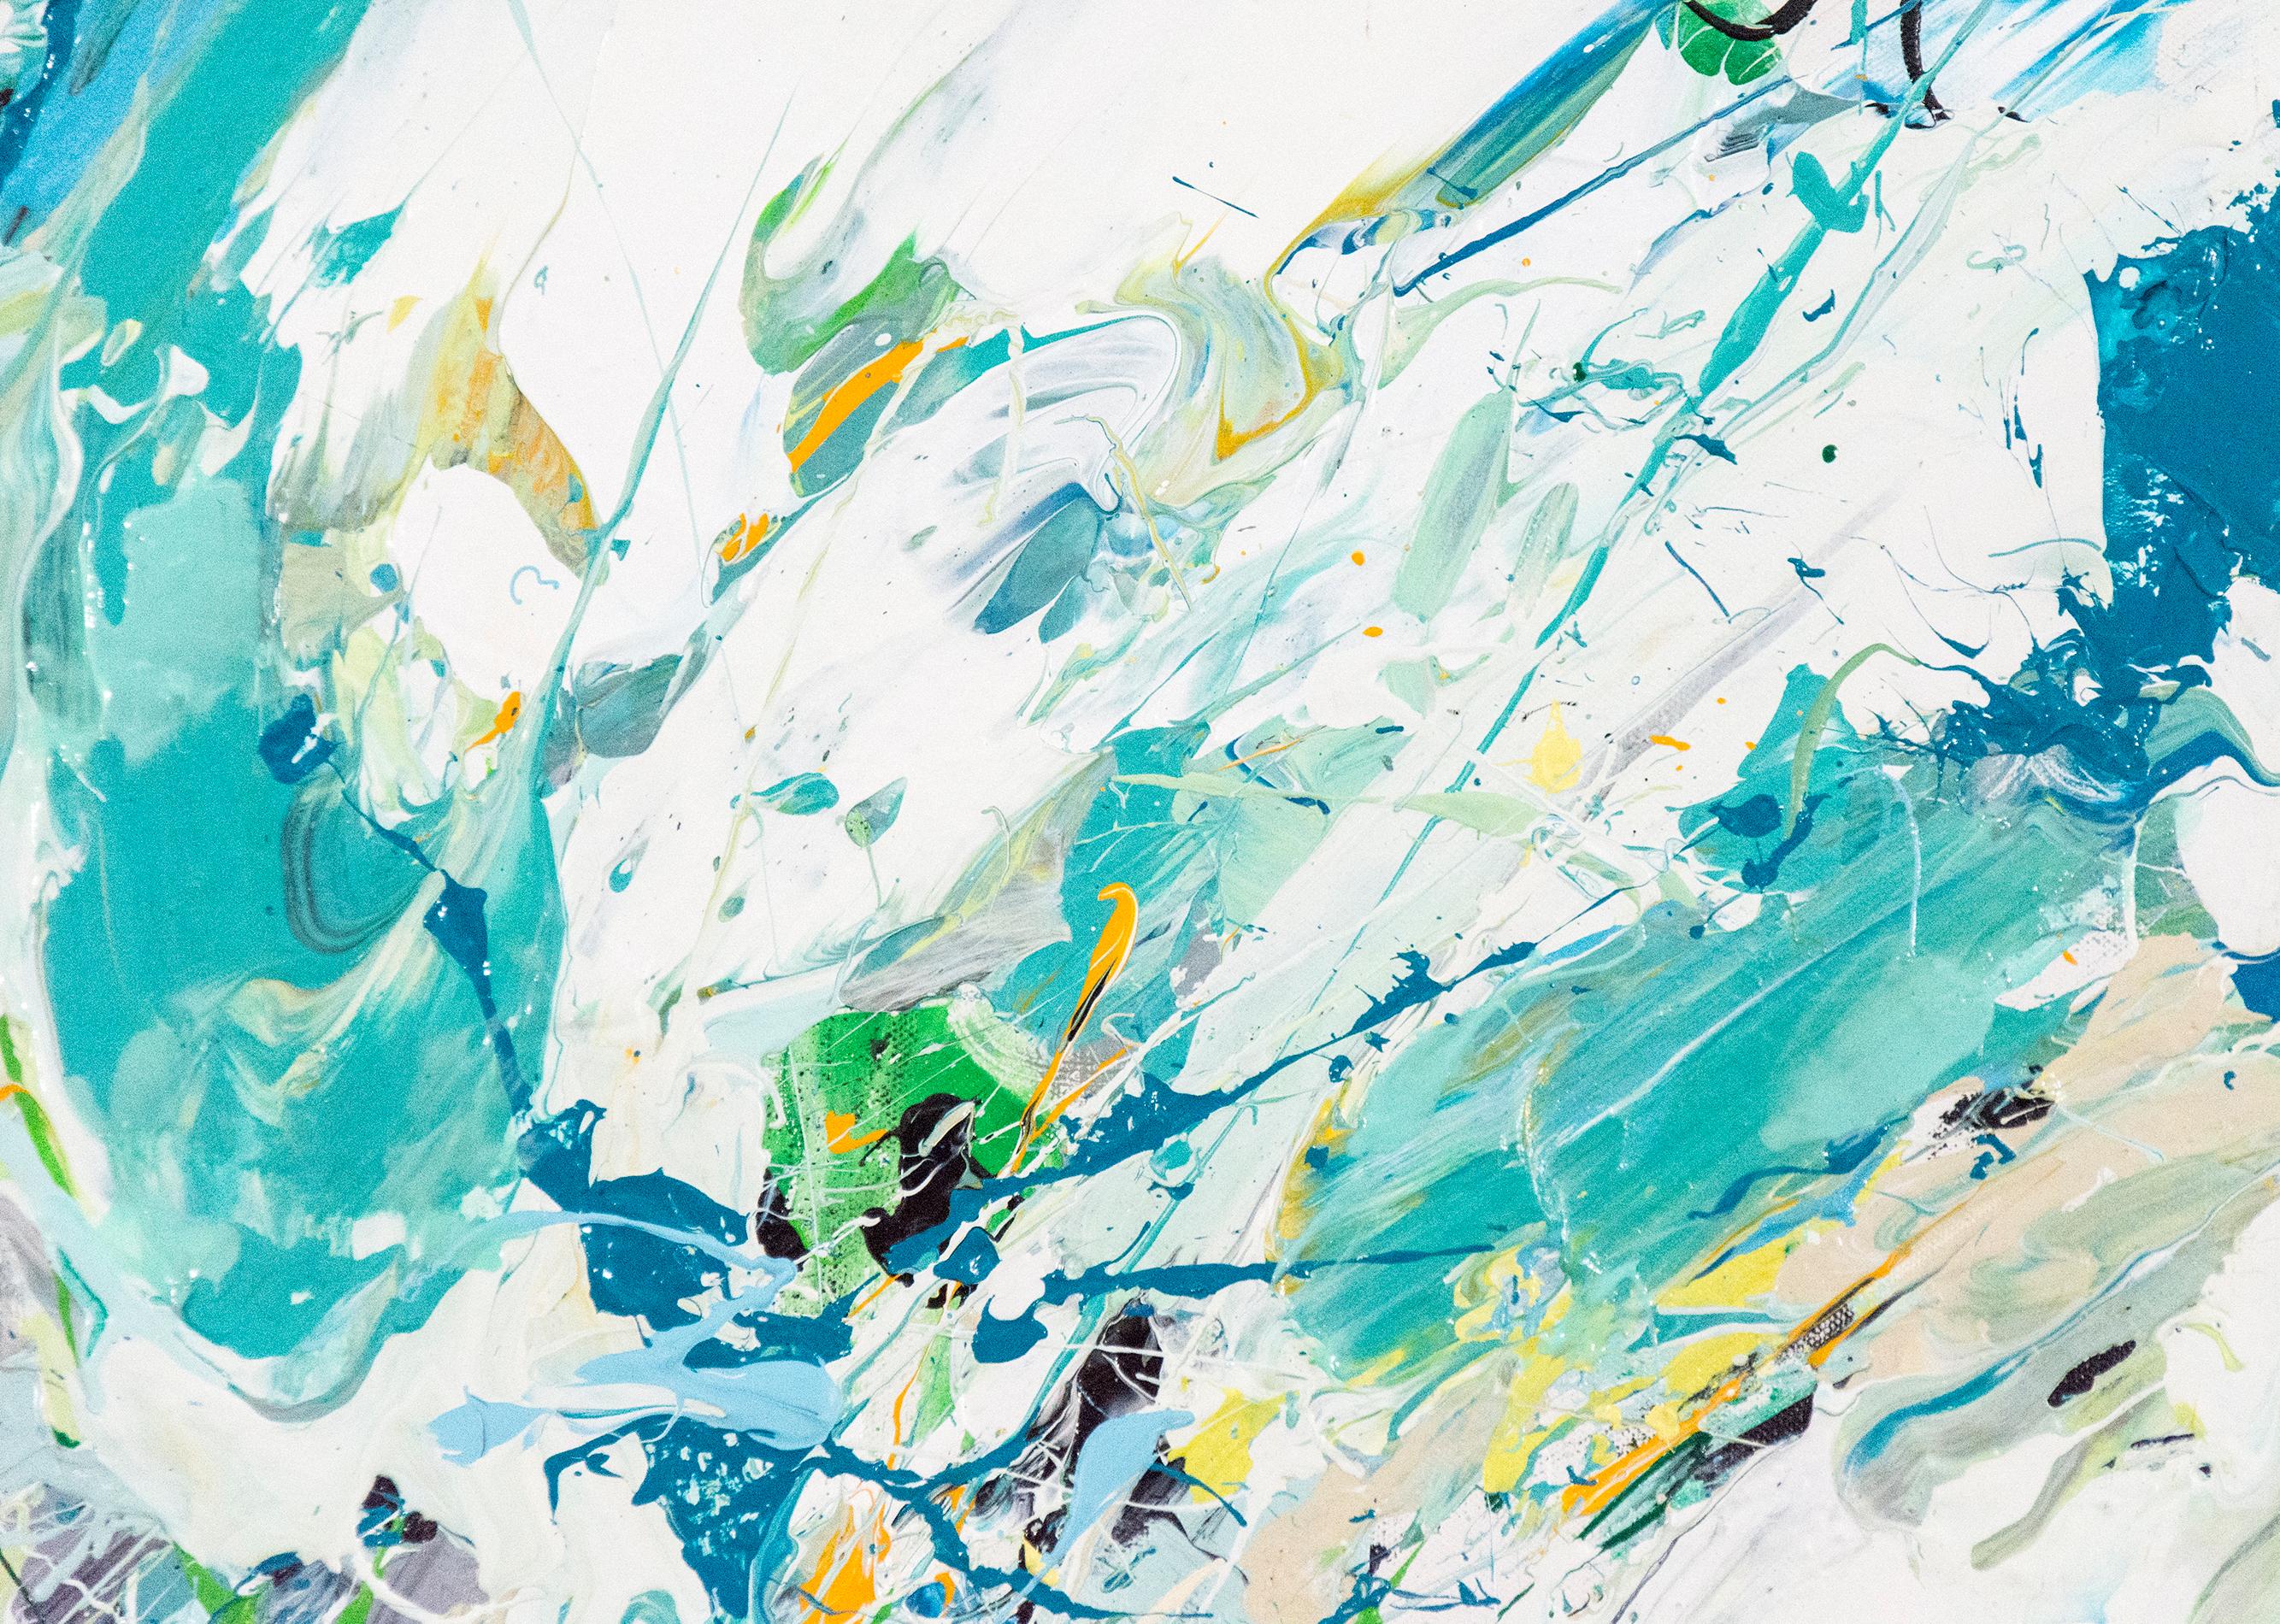 Swirling passages and drips of teal, gold and white coalesce at a central point in this action painting by Adam Cohen. Cohen intersects the language of heroic Abstract Expressionism with narrative to re-invent the experience of action painting in a